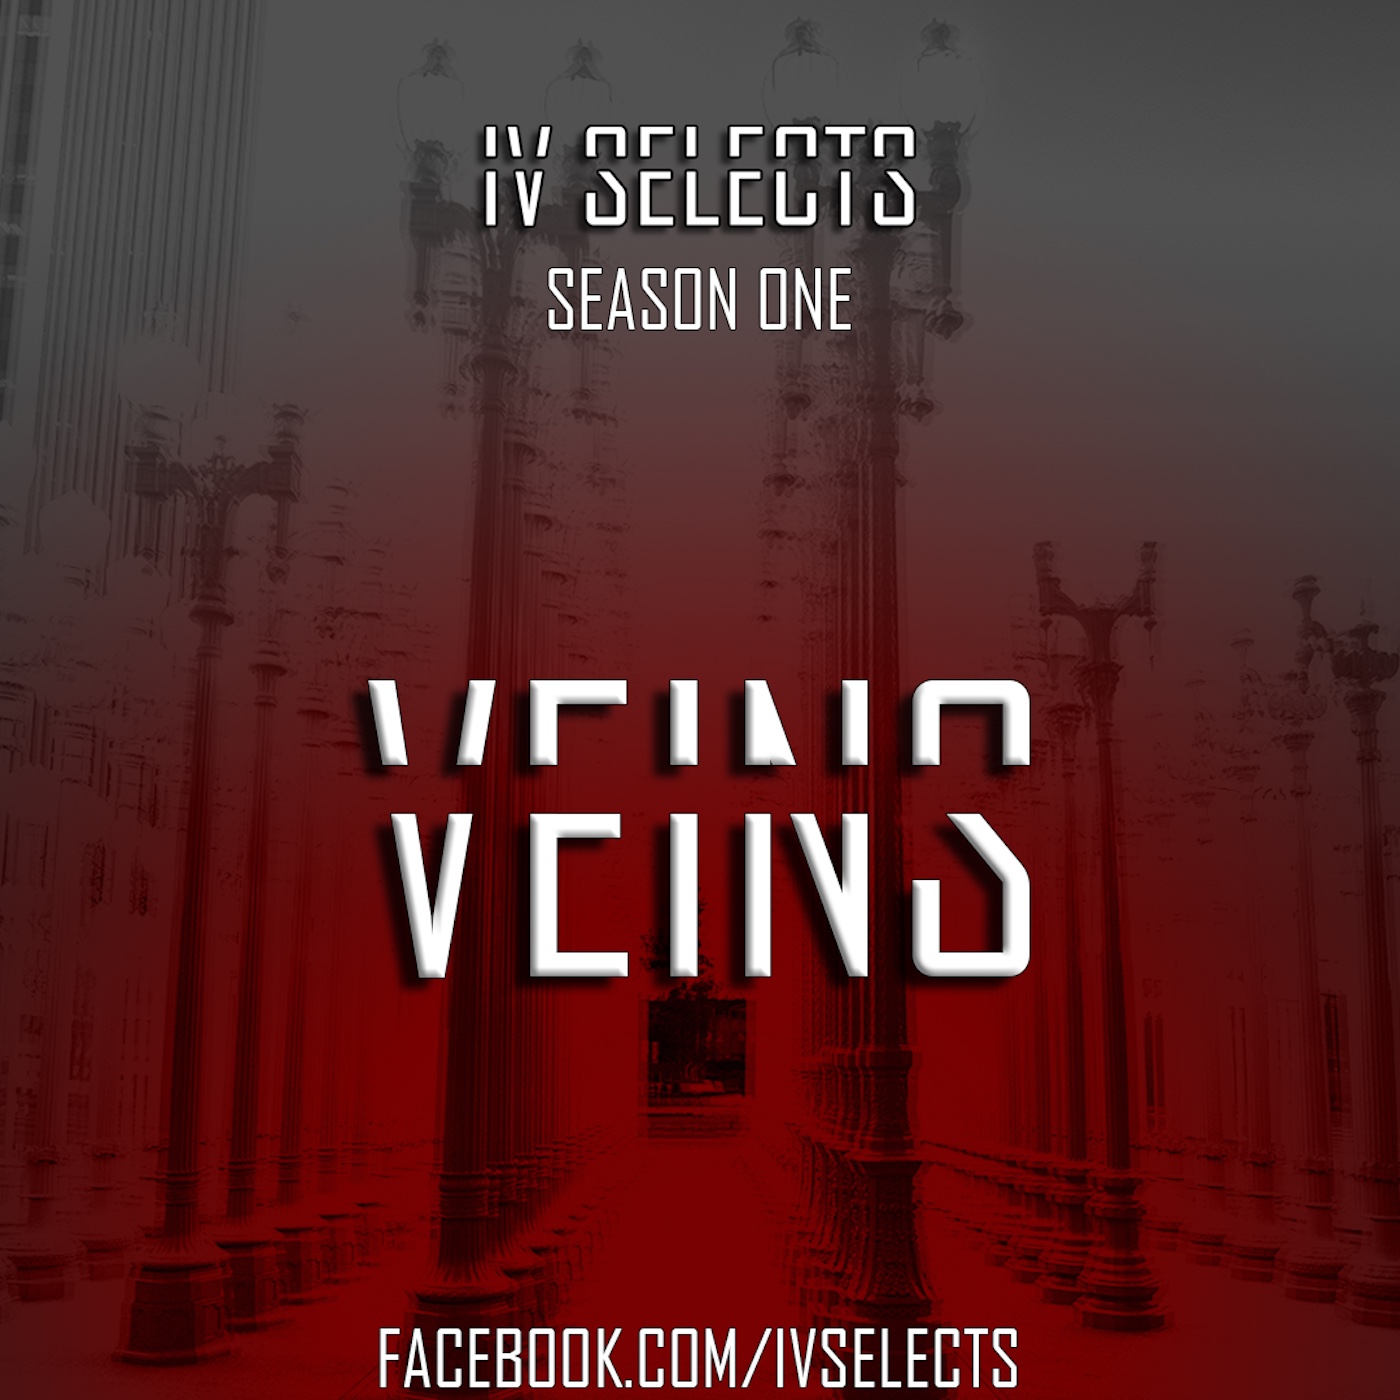 IV Selects S01E21: VEINS